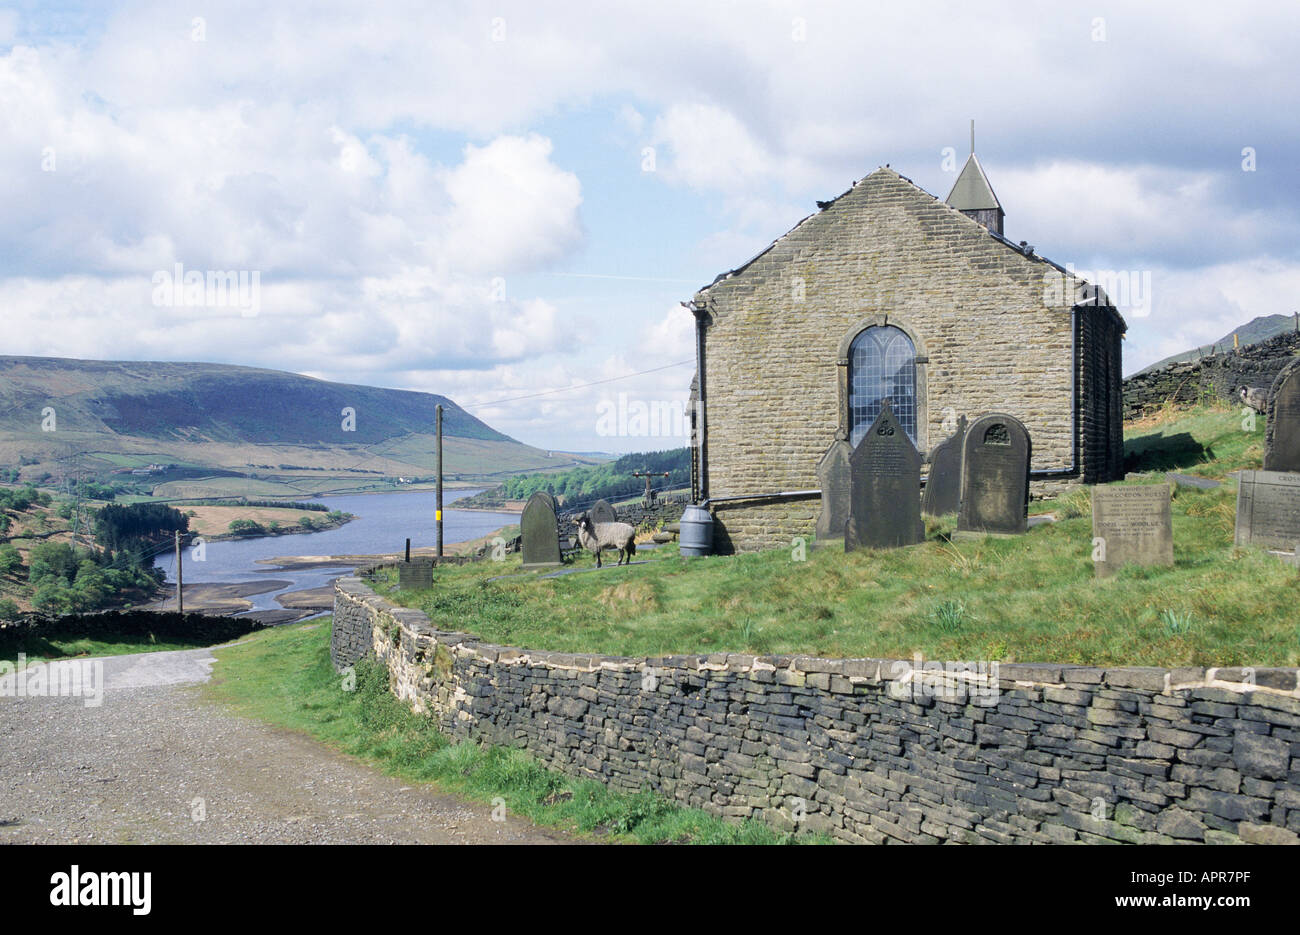 Isolated in the Longendale Valley Woodhead Chapel has memorials to builders and their families who died of cholera during the construction of the 1849 Woodhead railway tunnel Graveyard and sheep in the foreground Wall around the church Road leading towards the lake Peak District Stock Photo